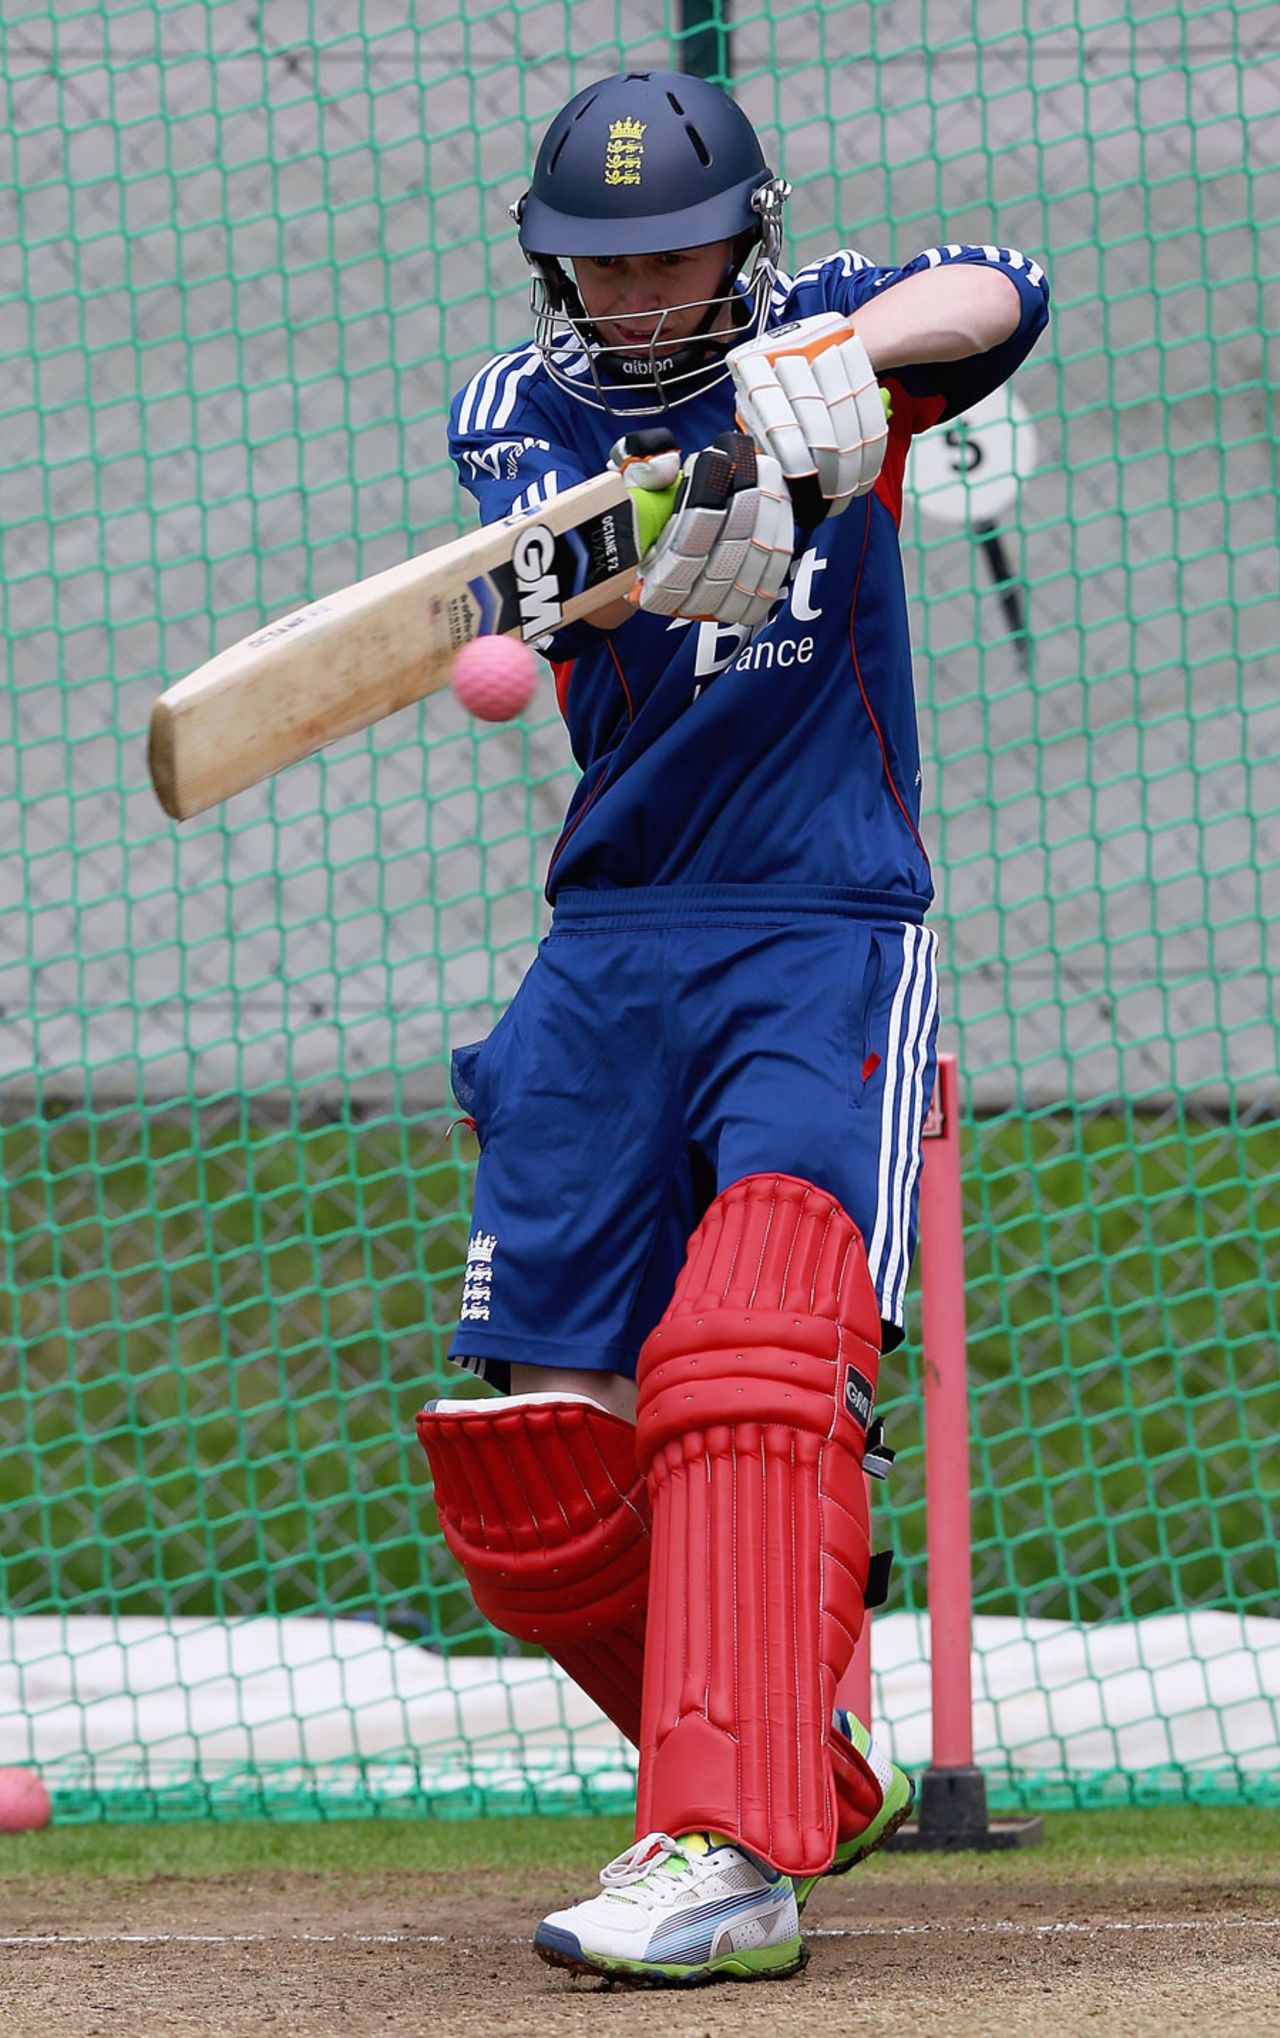 Jonathan Tattersall practises in the nets, National Cricket Performance Centre, Loughborough, August 5, 2013